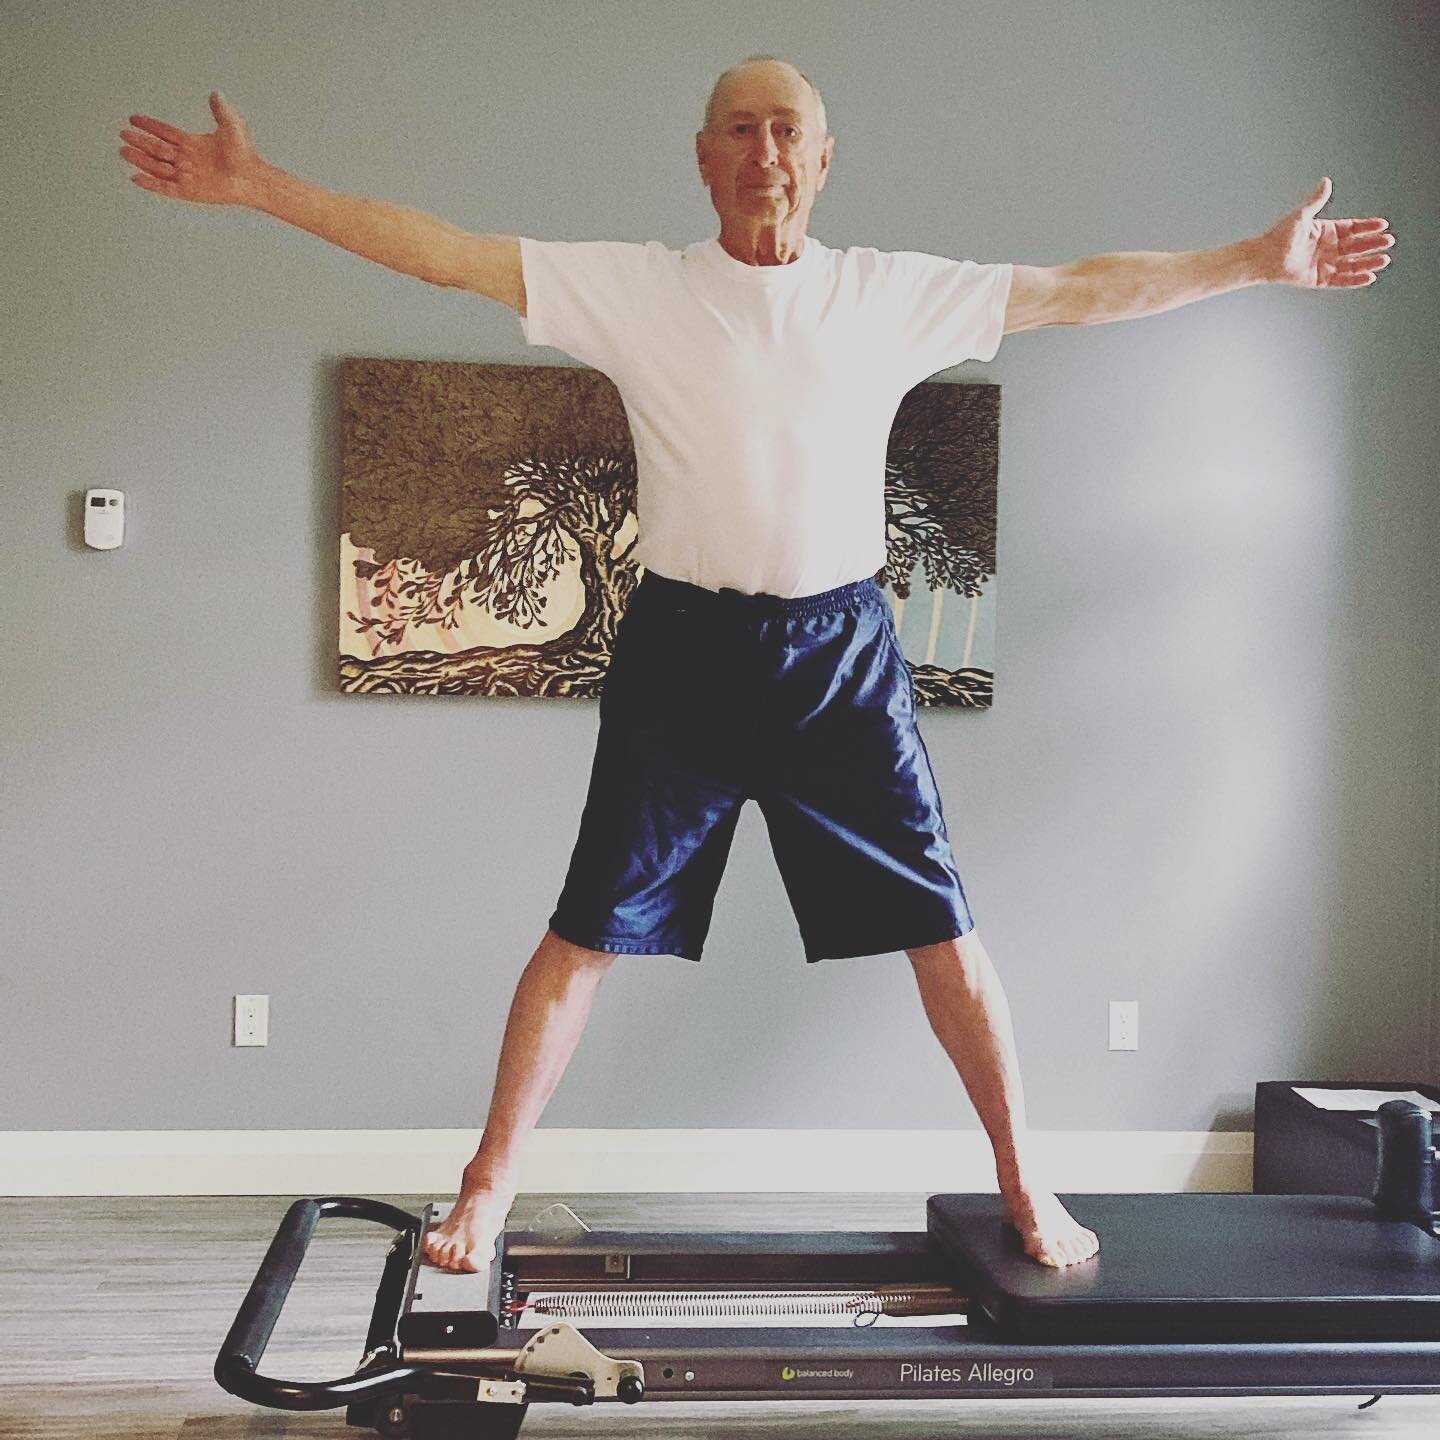 Almost 80 years old and hitting the golf ball further than ever, and all thanks to a weekly customized Pilates program! ⛳️🏌️&ldquo;If your spine is inflexibly stiff at 30, you are old. If your spine is completely flexible at 60, you are young. You a